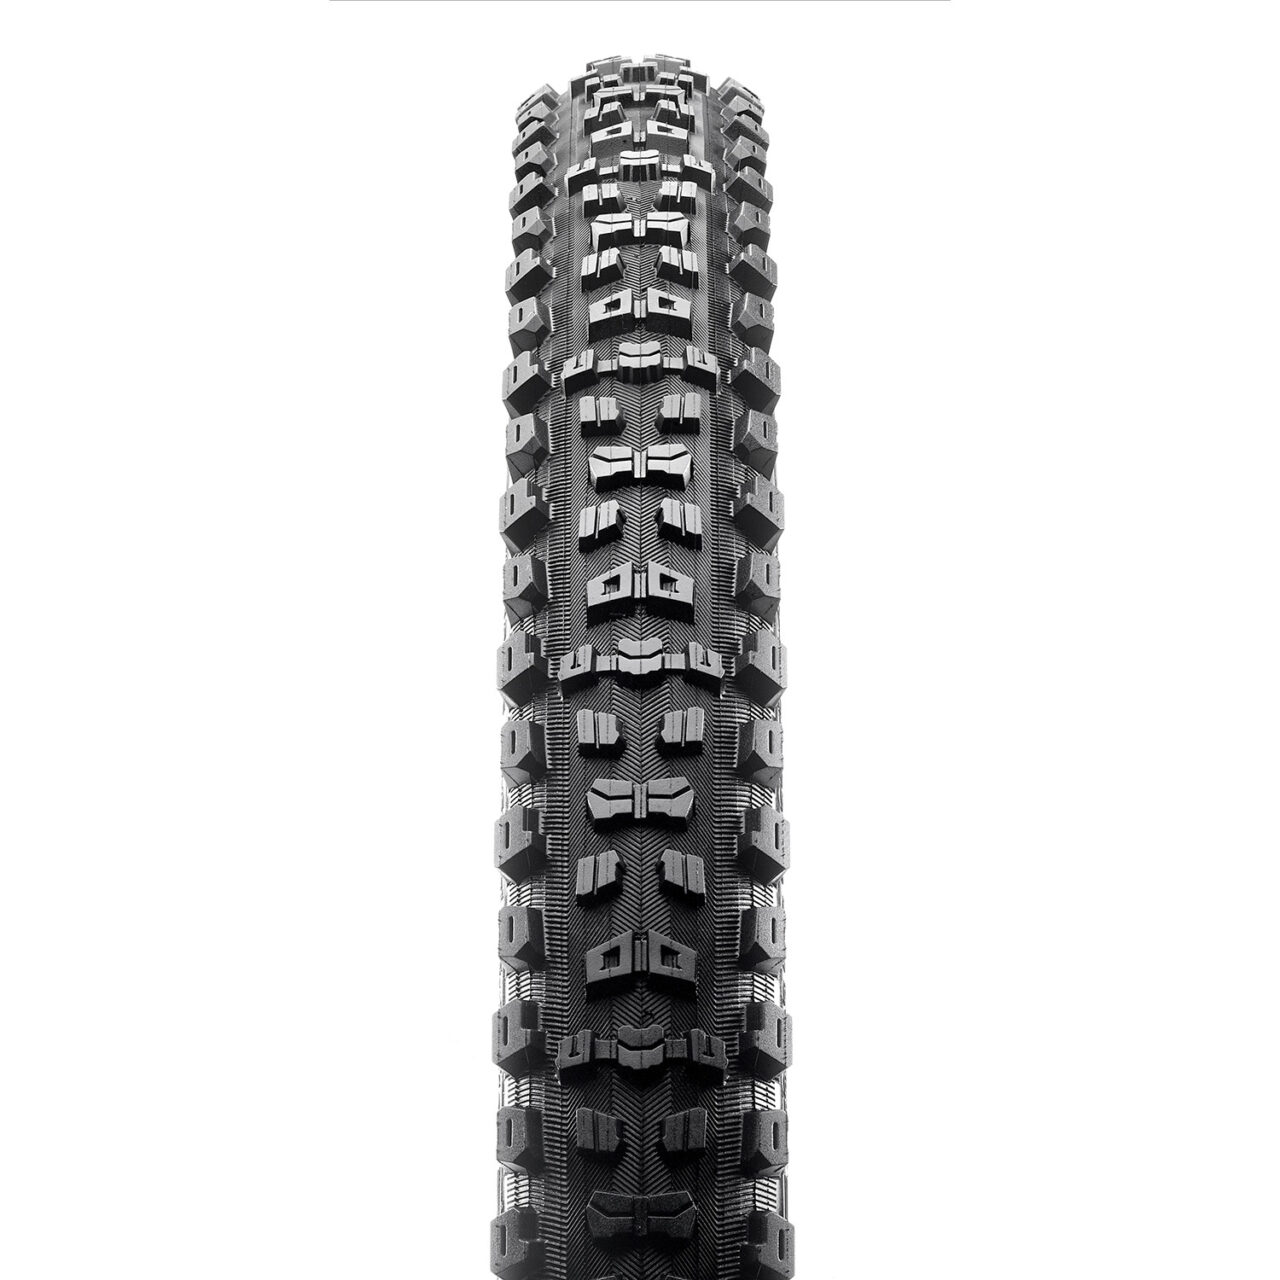 Maxxis Aggressor bicycle tire tread